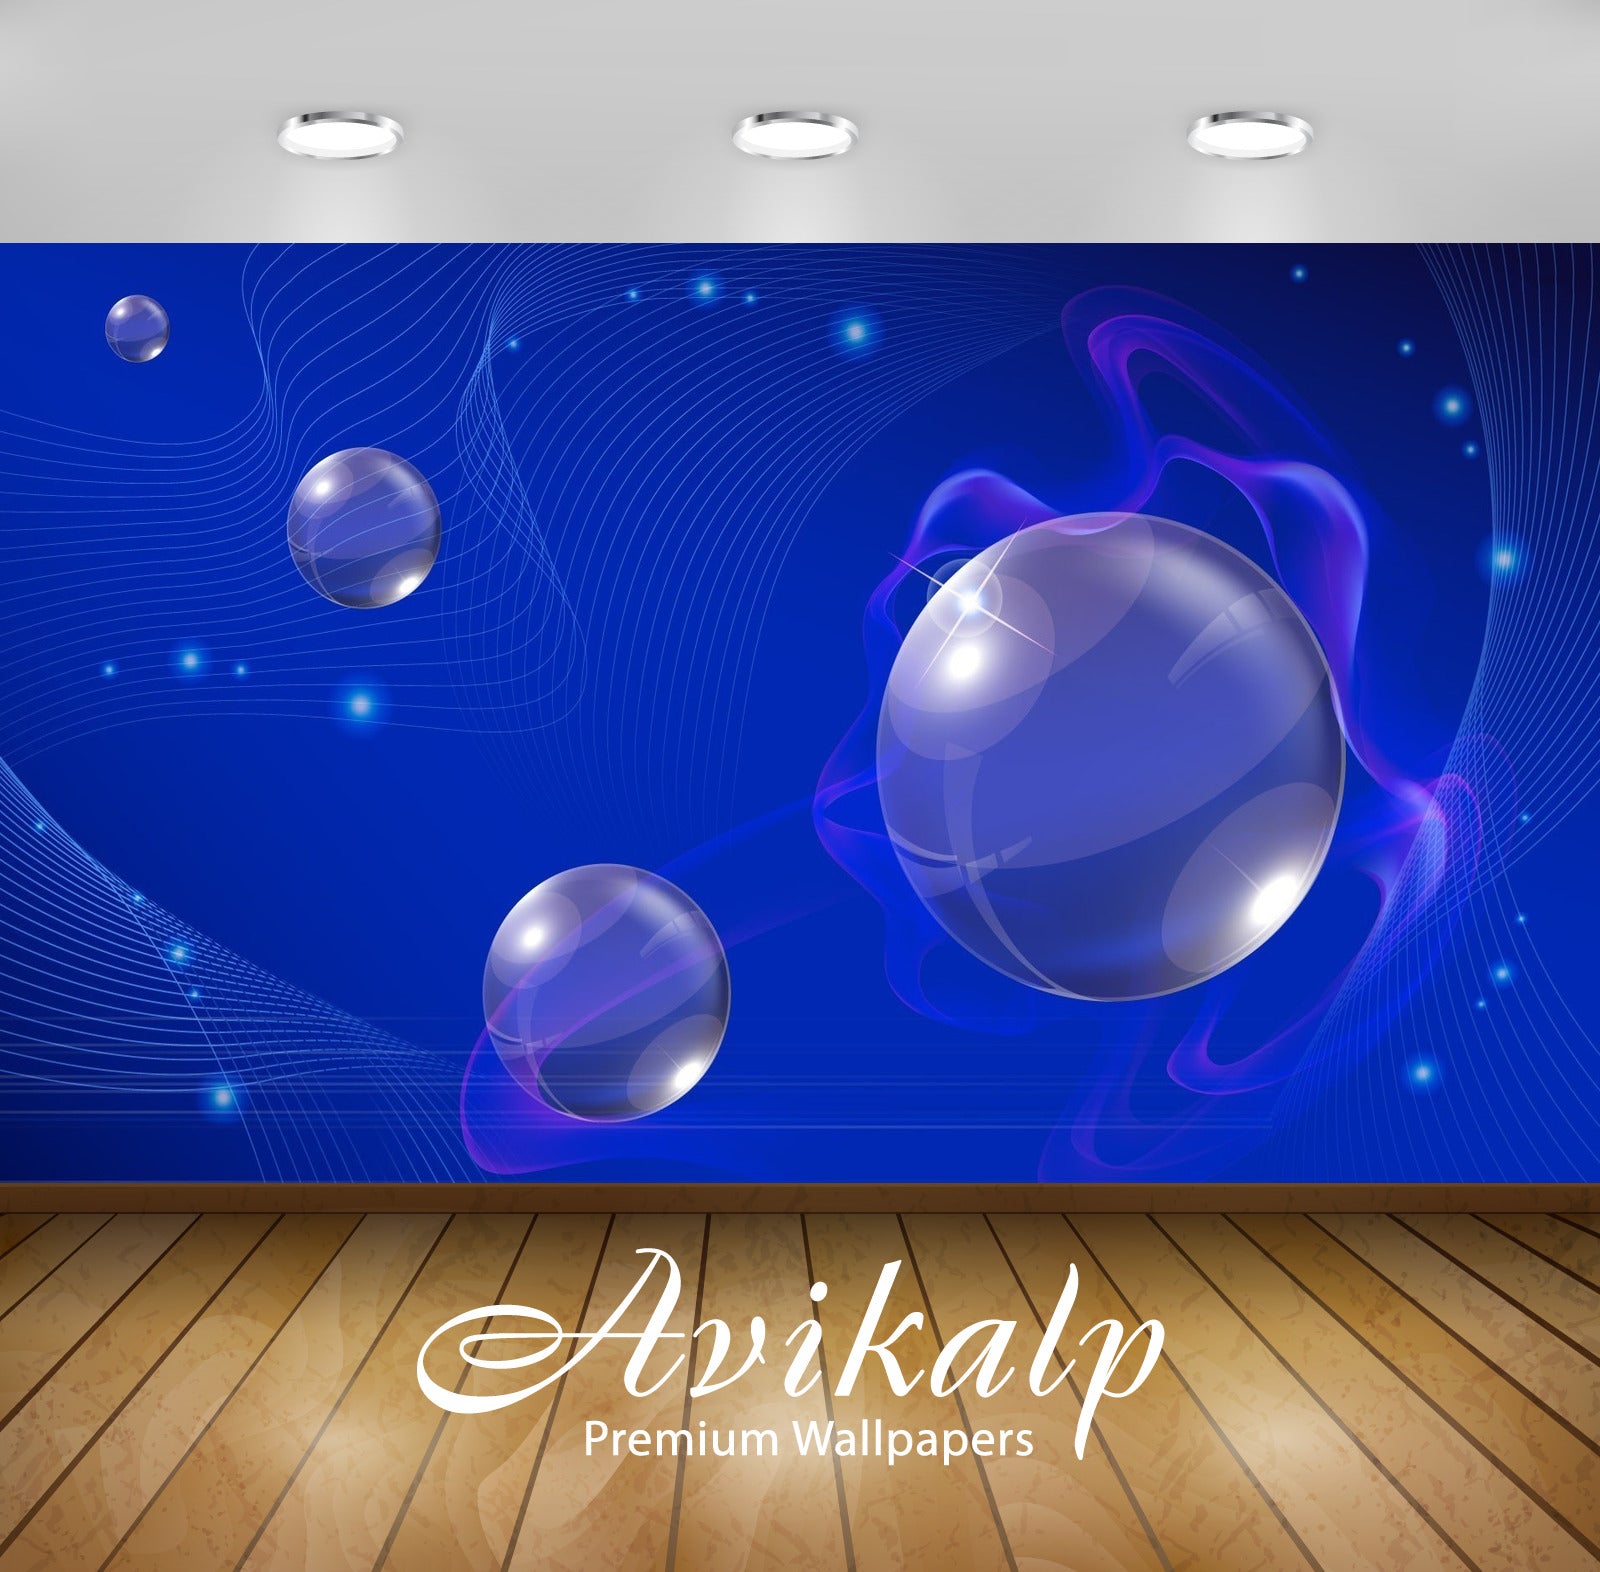 Avikalp Exclusive Awi4612 Spheres Full HD Wallpapers for Living room, Hall, Kids Room, Kitchen, TV B